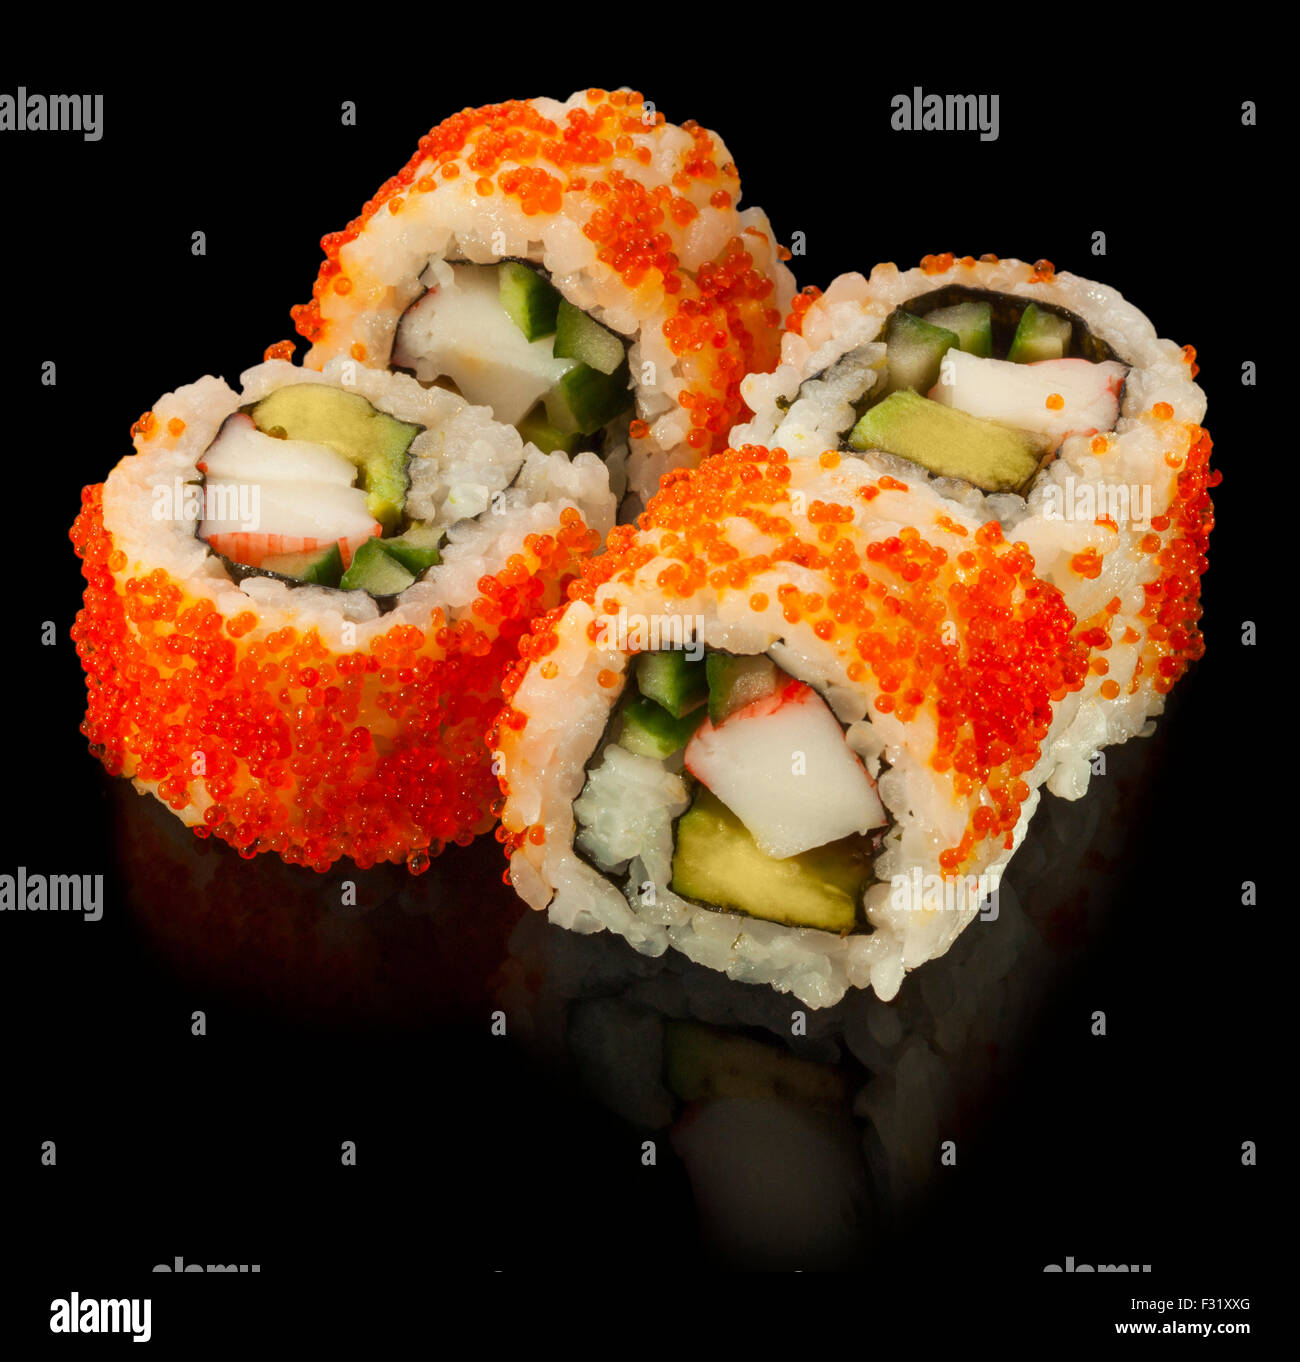 Sushi roll with crab stick and avocado Stock Photo: 87938888 - Alamy